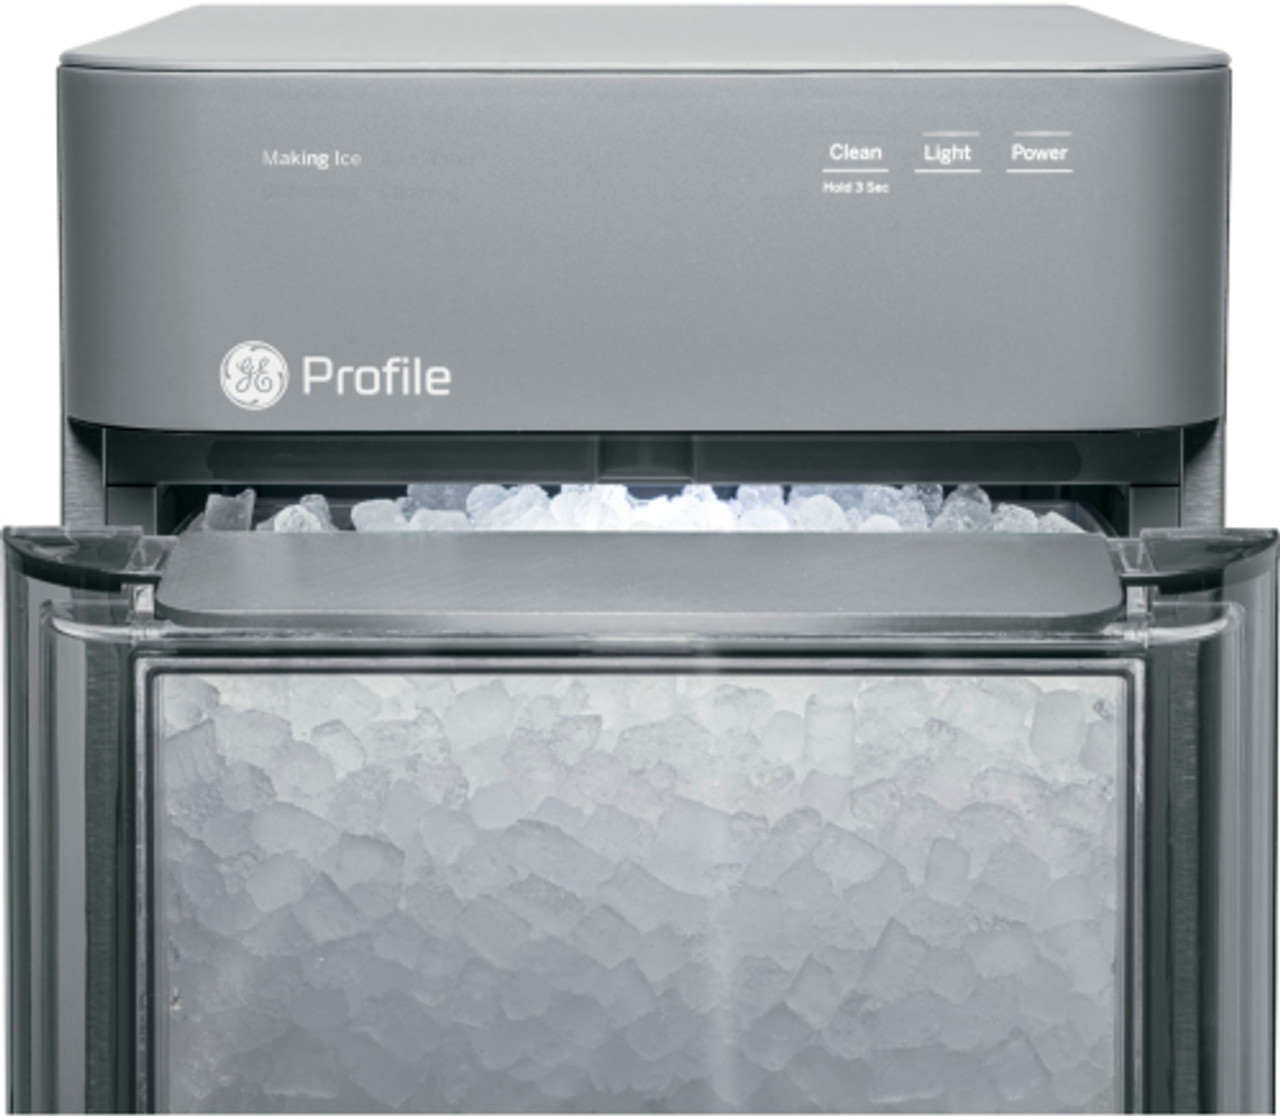 GE Profile - Opal 2.0 24 lb. Freestanding Nugget Ice Maker with Built-In WiFi - Stainless steel